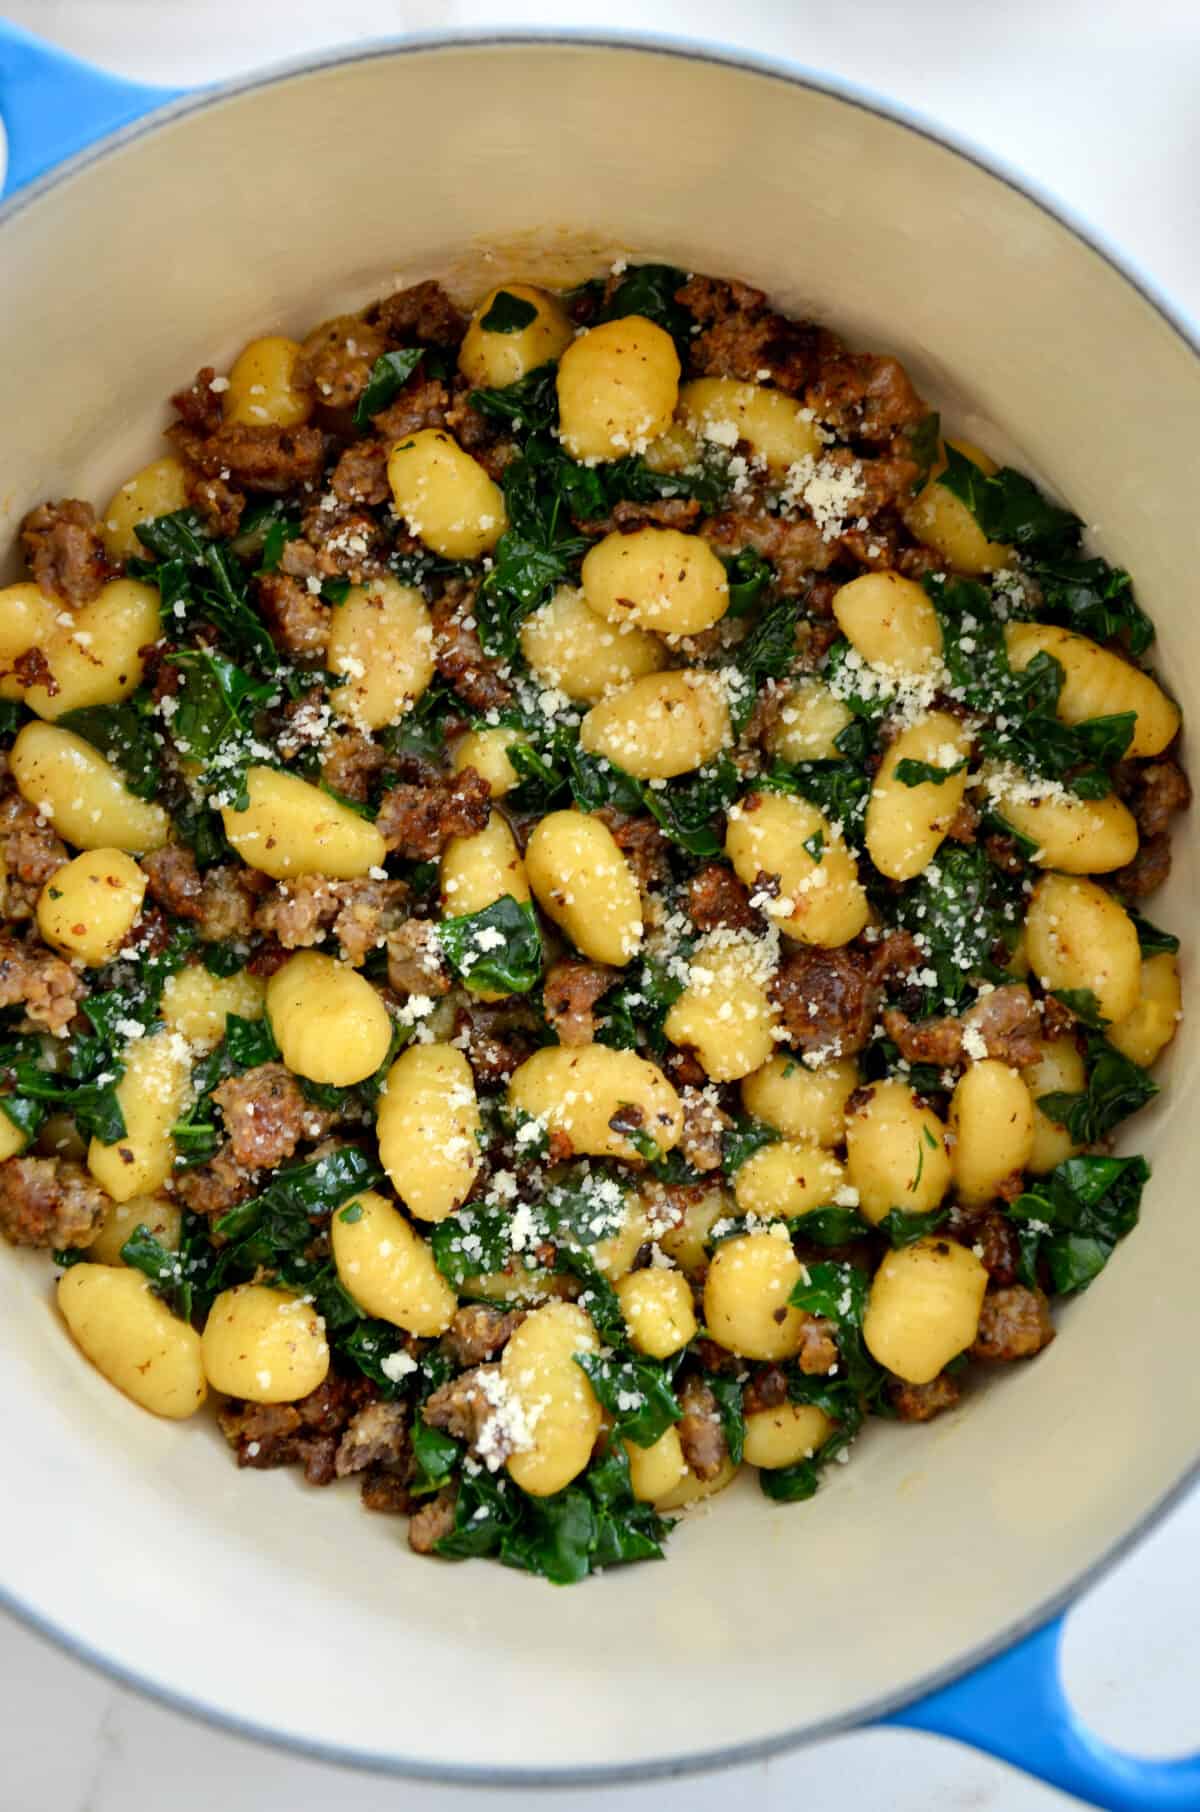 A close-up view of One-Pot Gnocchi with Sausage and kale in a large stock pot